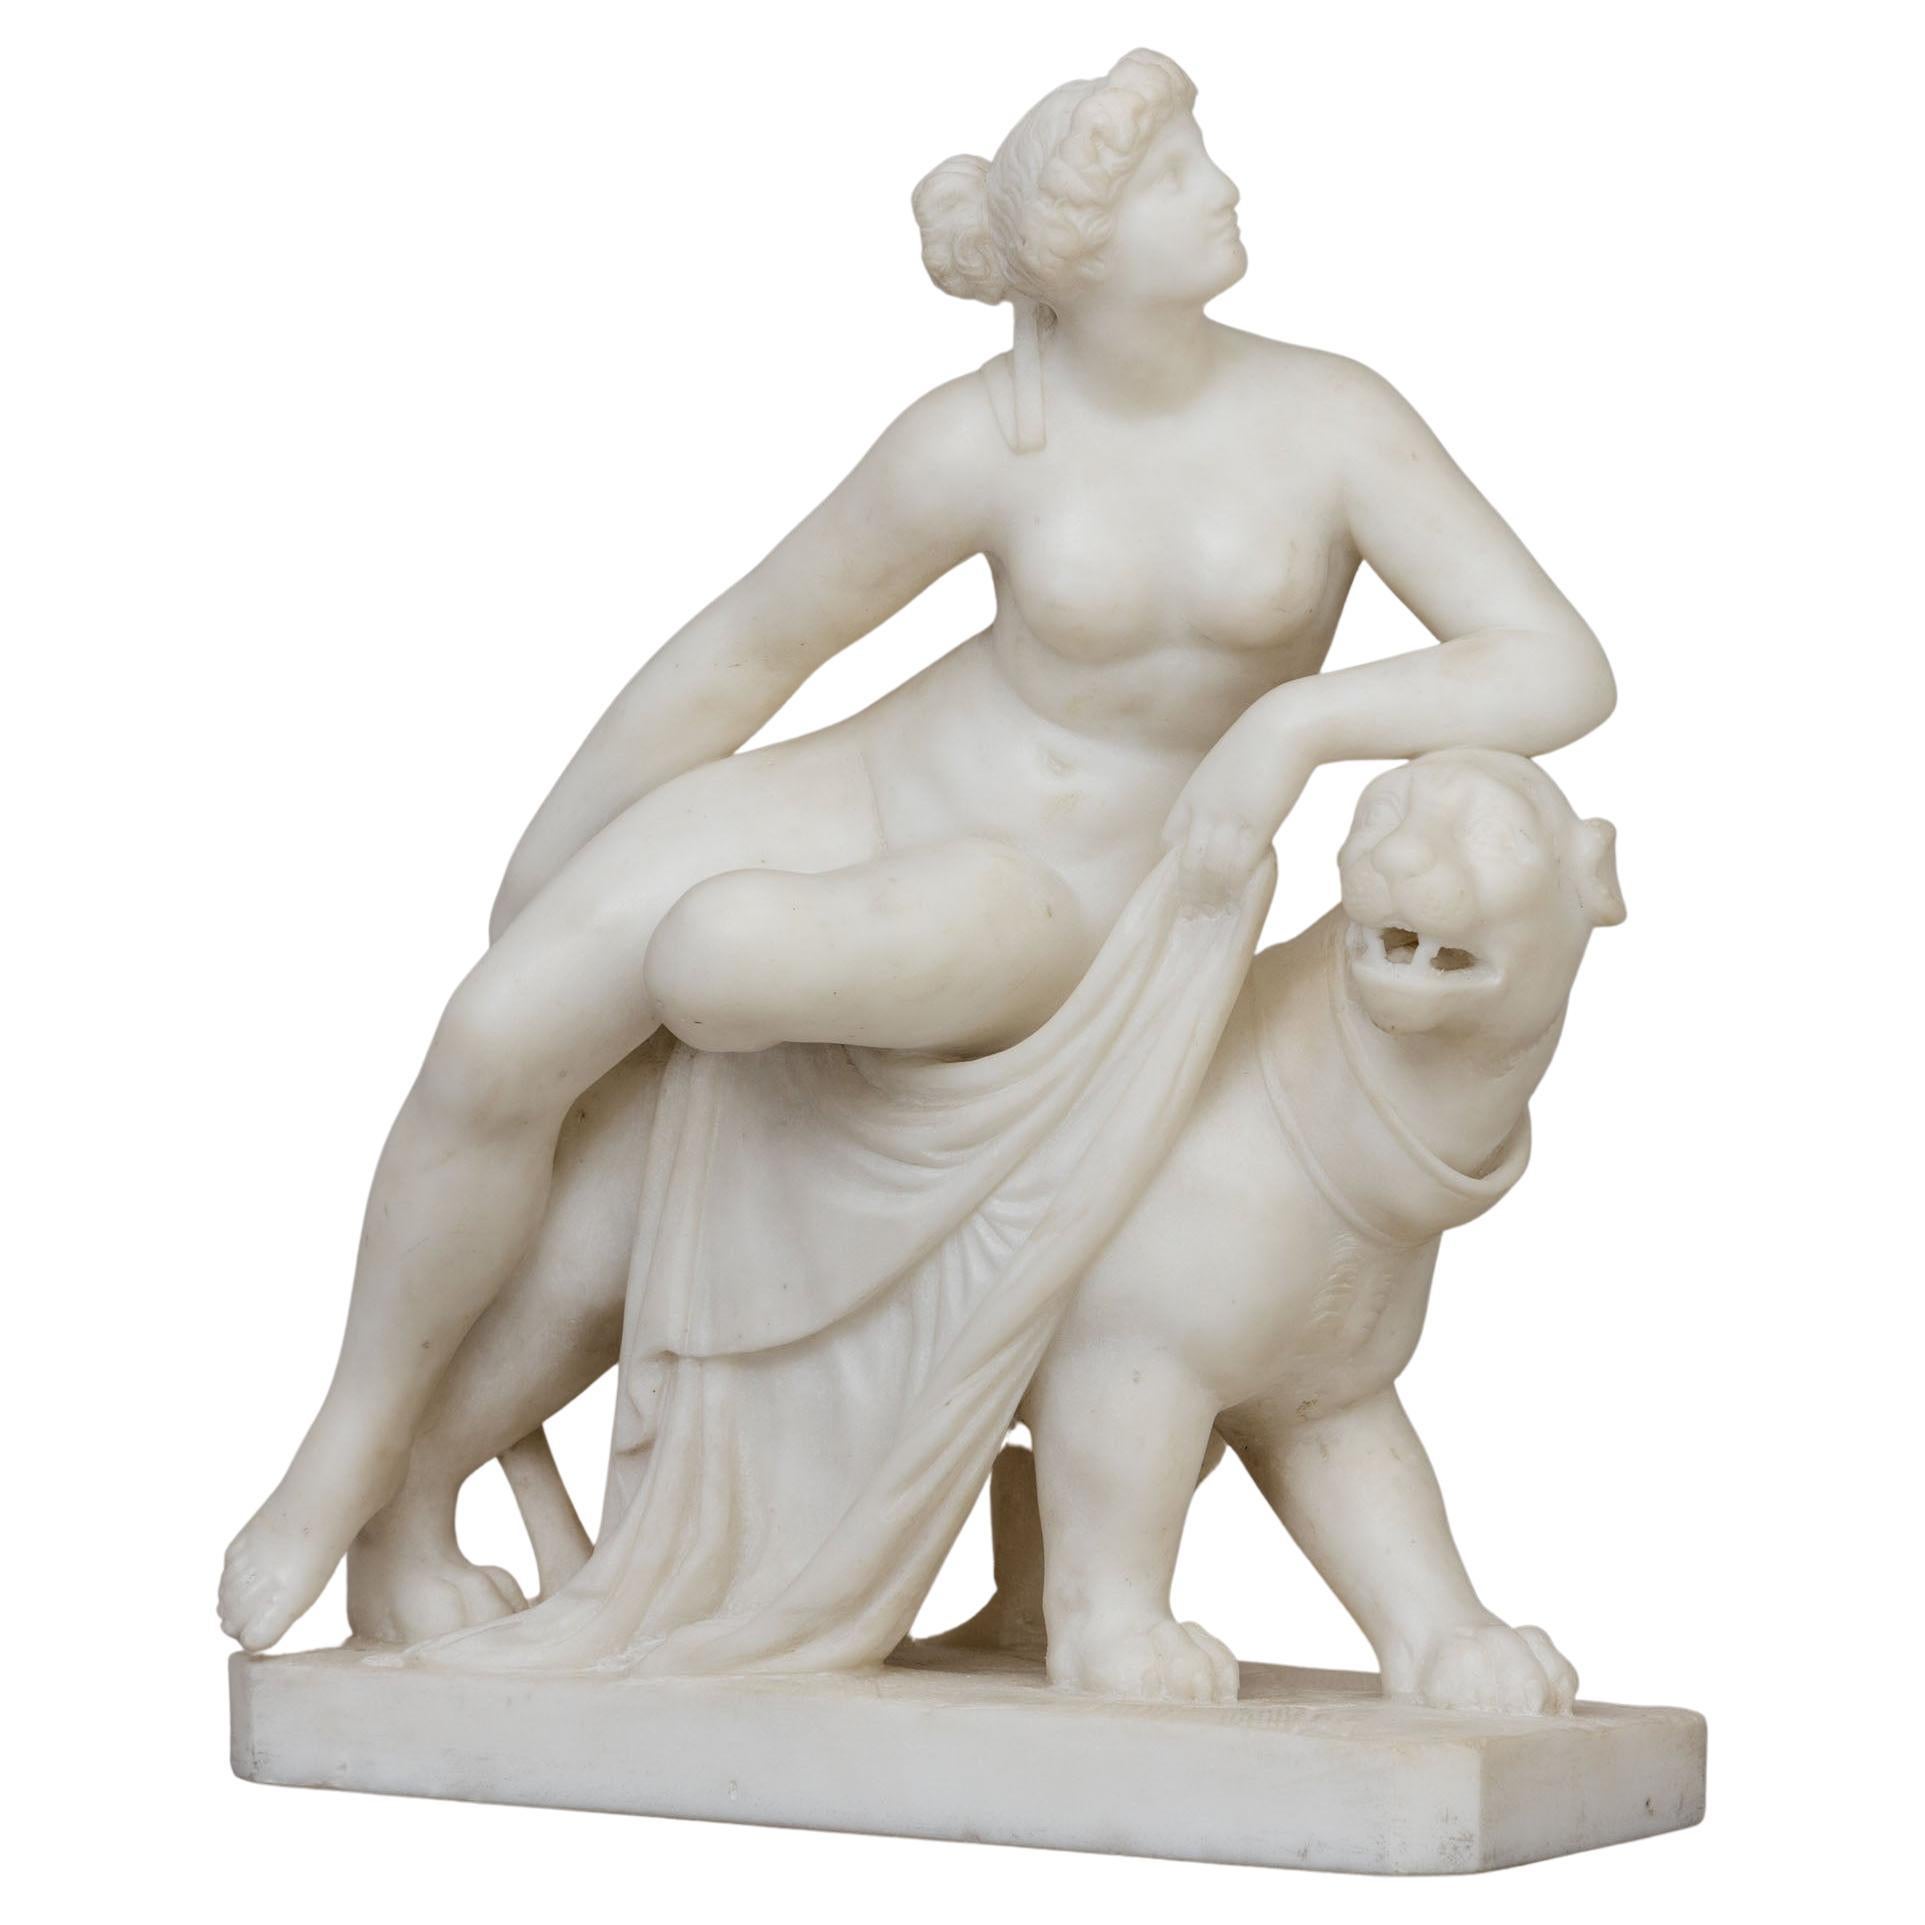 Ariadne on the Panther, After Dannecker, 2nd Half 19th Century